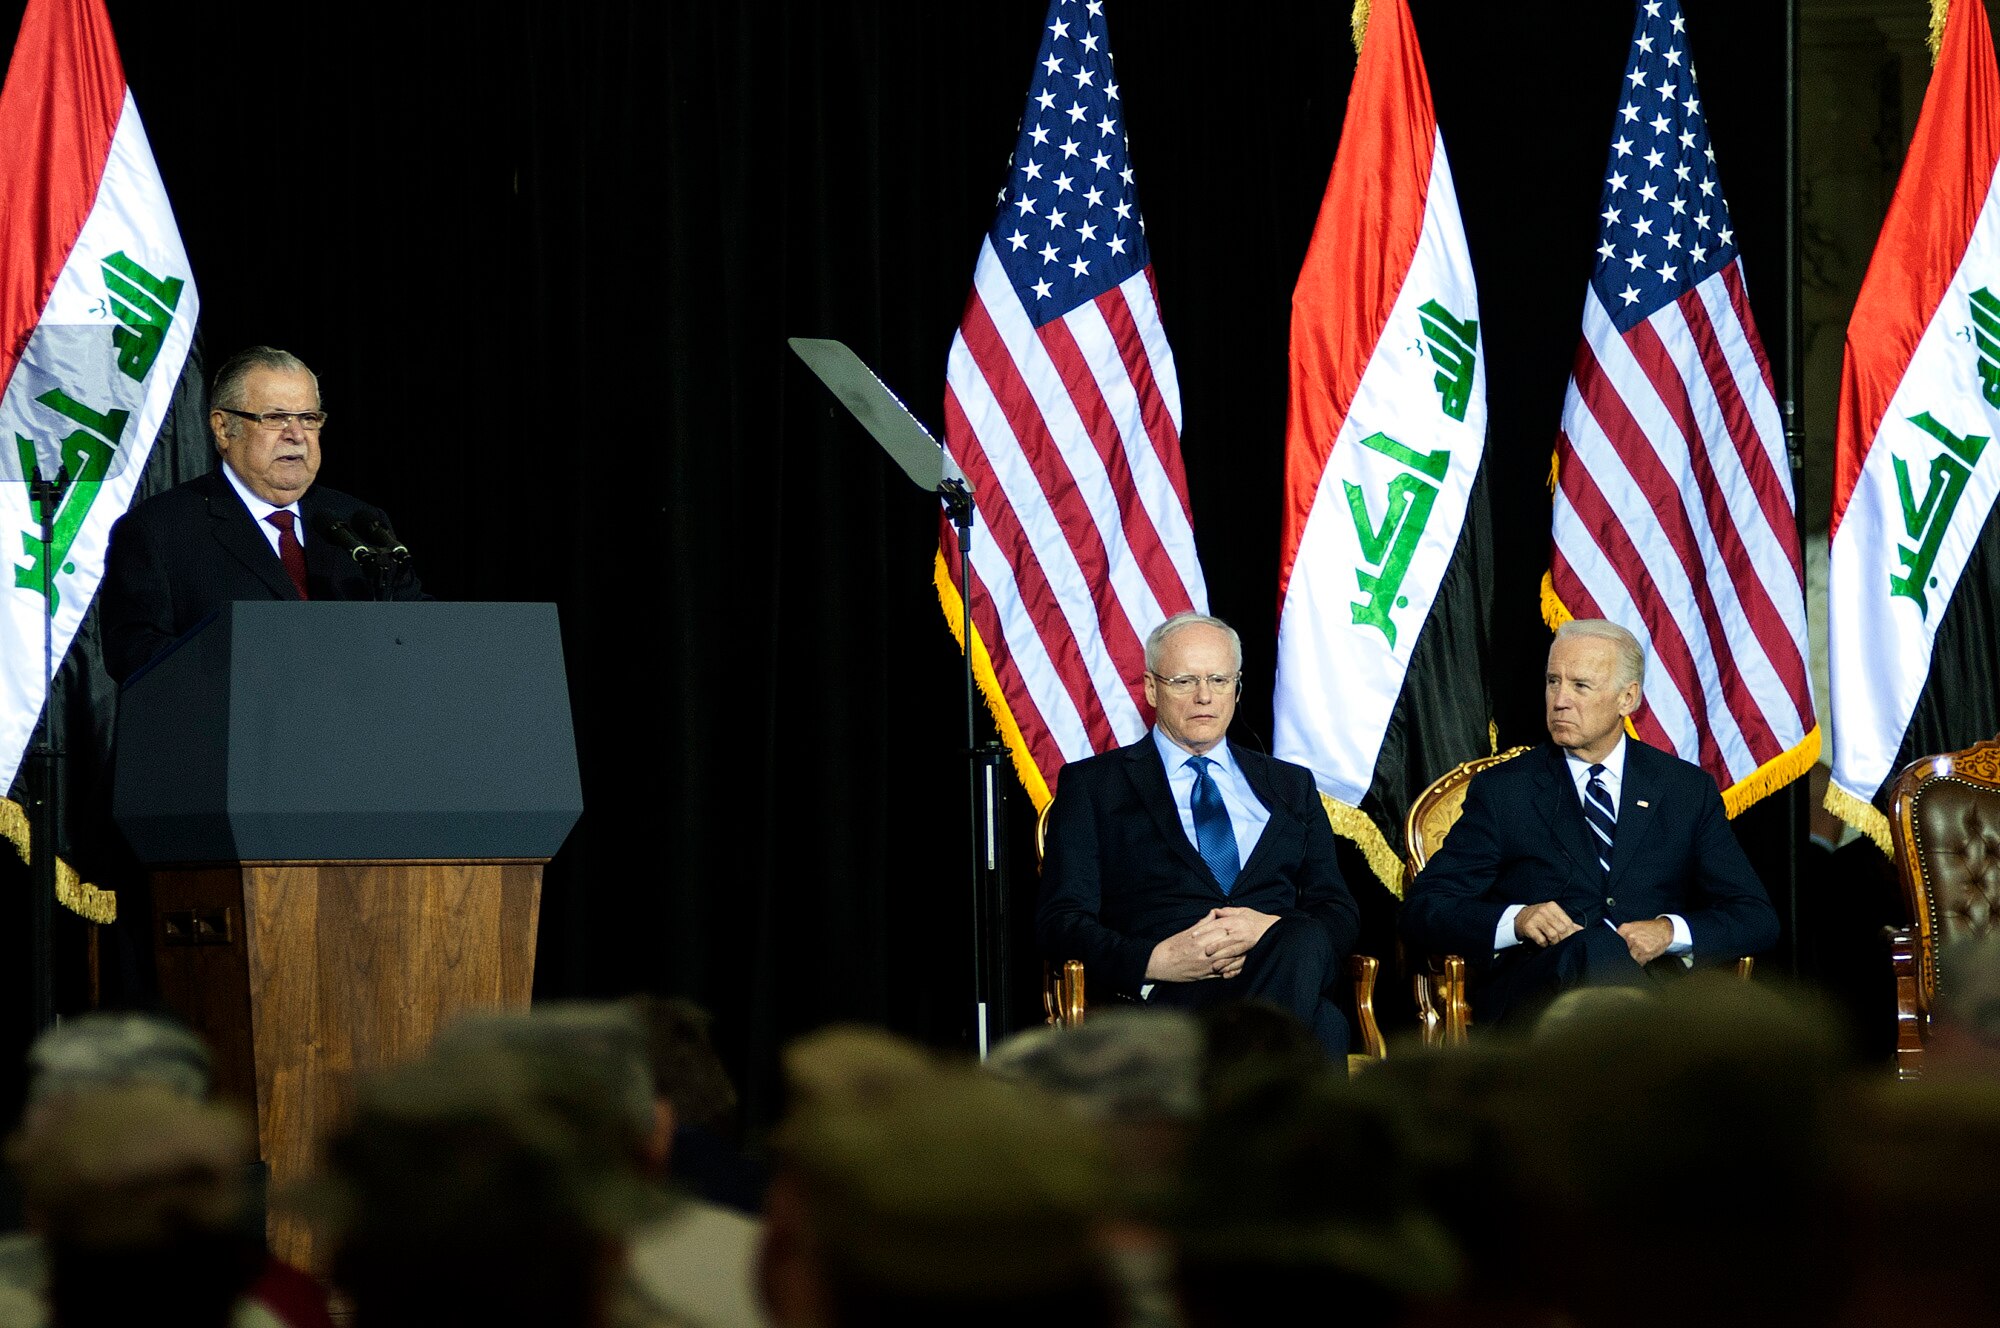 President of Iraq, Jalal Talabani, gives a speech during the Commitment Day ceremony in the Al Faw Palace at Victory Base Complex, Iraq, on Dec. 1, 2011. The Government of Iraq hosted the ceremony to commemorate the sacrifices and accomplishments of U.S. and Iraqi service members. Ambassador to Iraq, James F. Jeffrey (left) and Vice President of the United States, Joe Biden (right), were present for the ceremony. (U.S. Air Force photo/Master Sgt. Cecilio Ricardo)